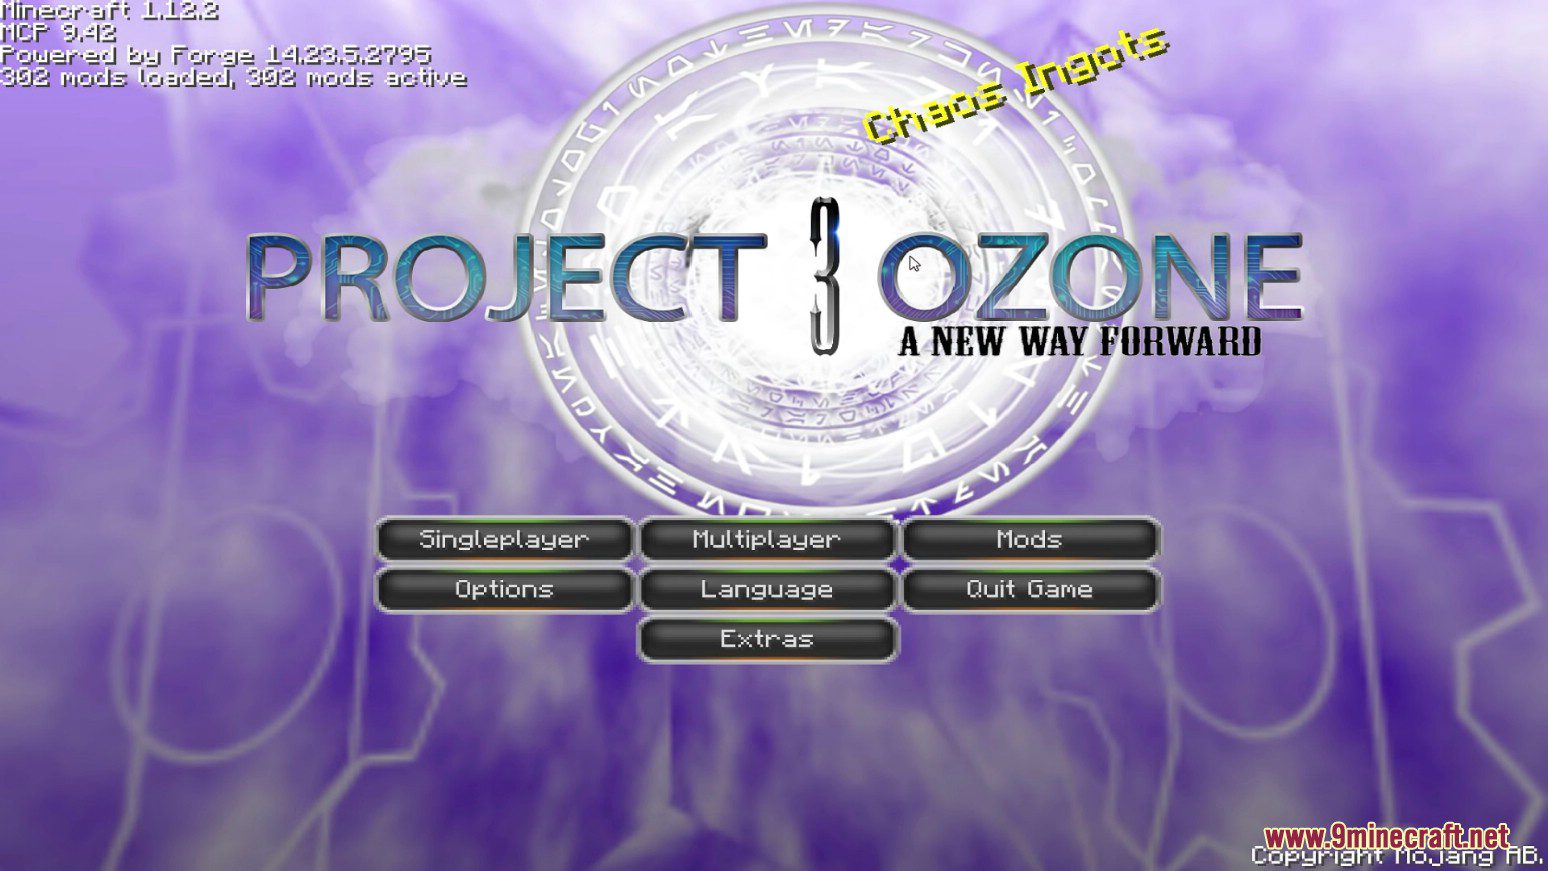 Project Ozone 3 Modpack (1.12.2) - A New Way Forward 2